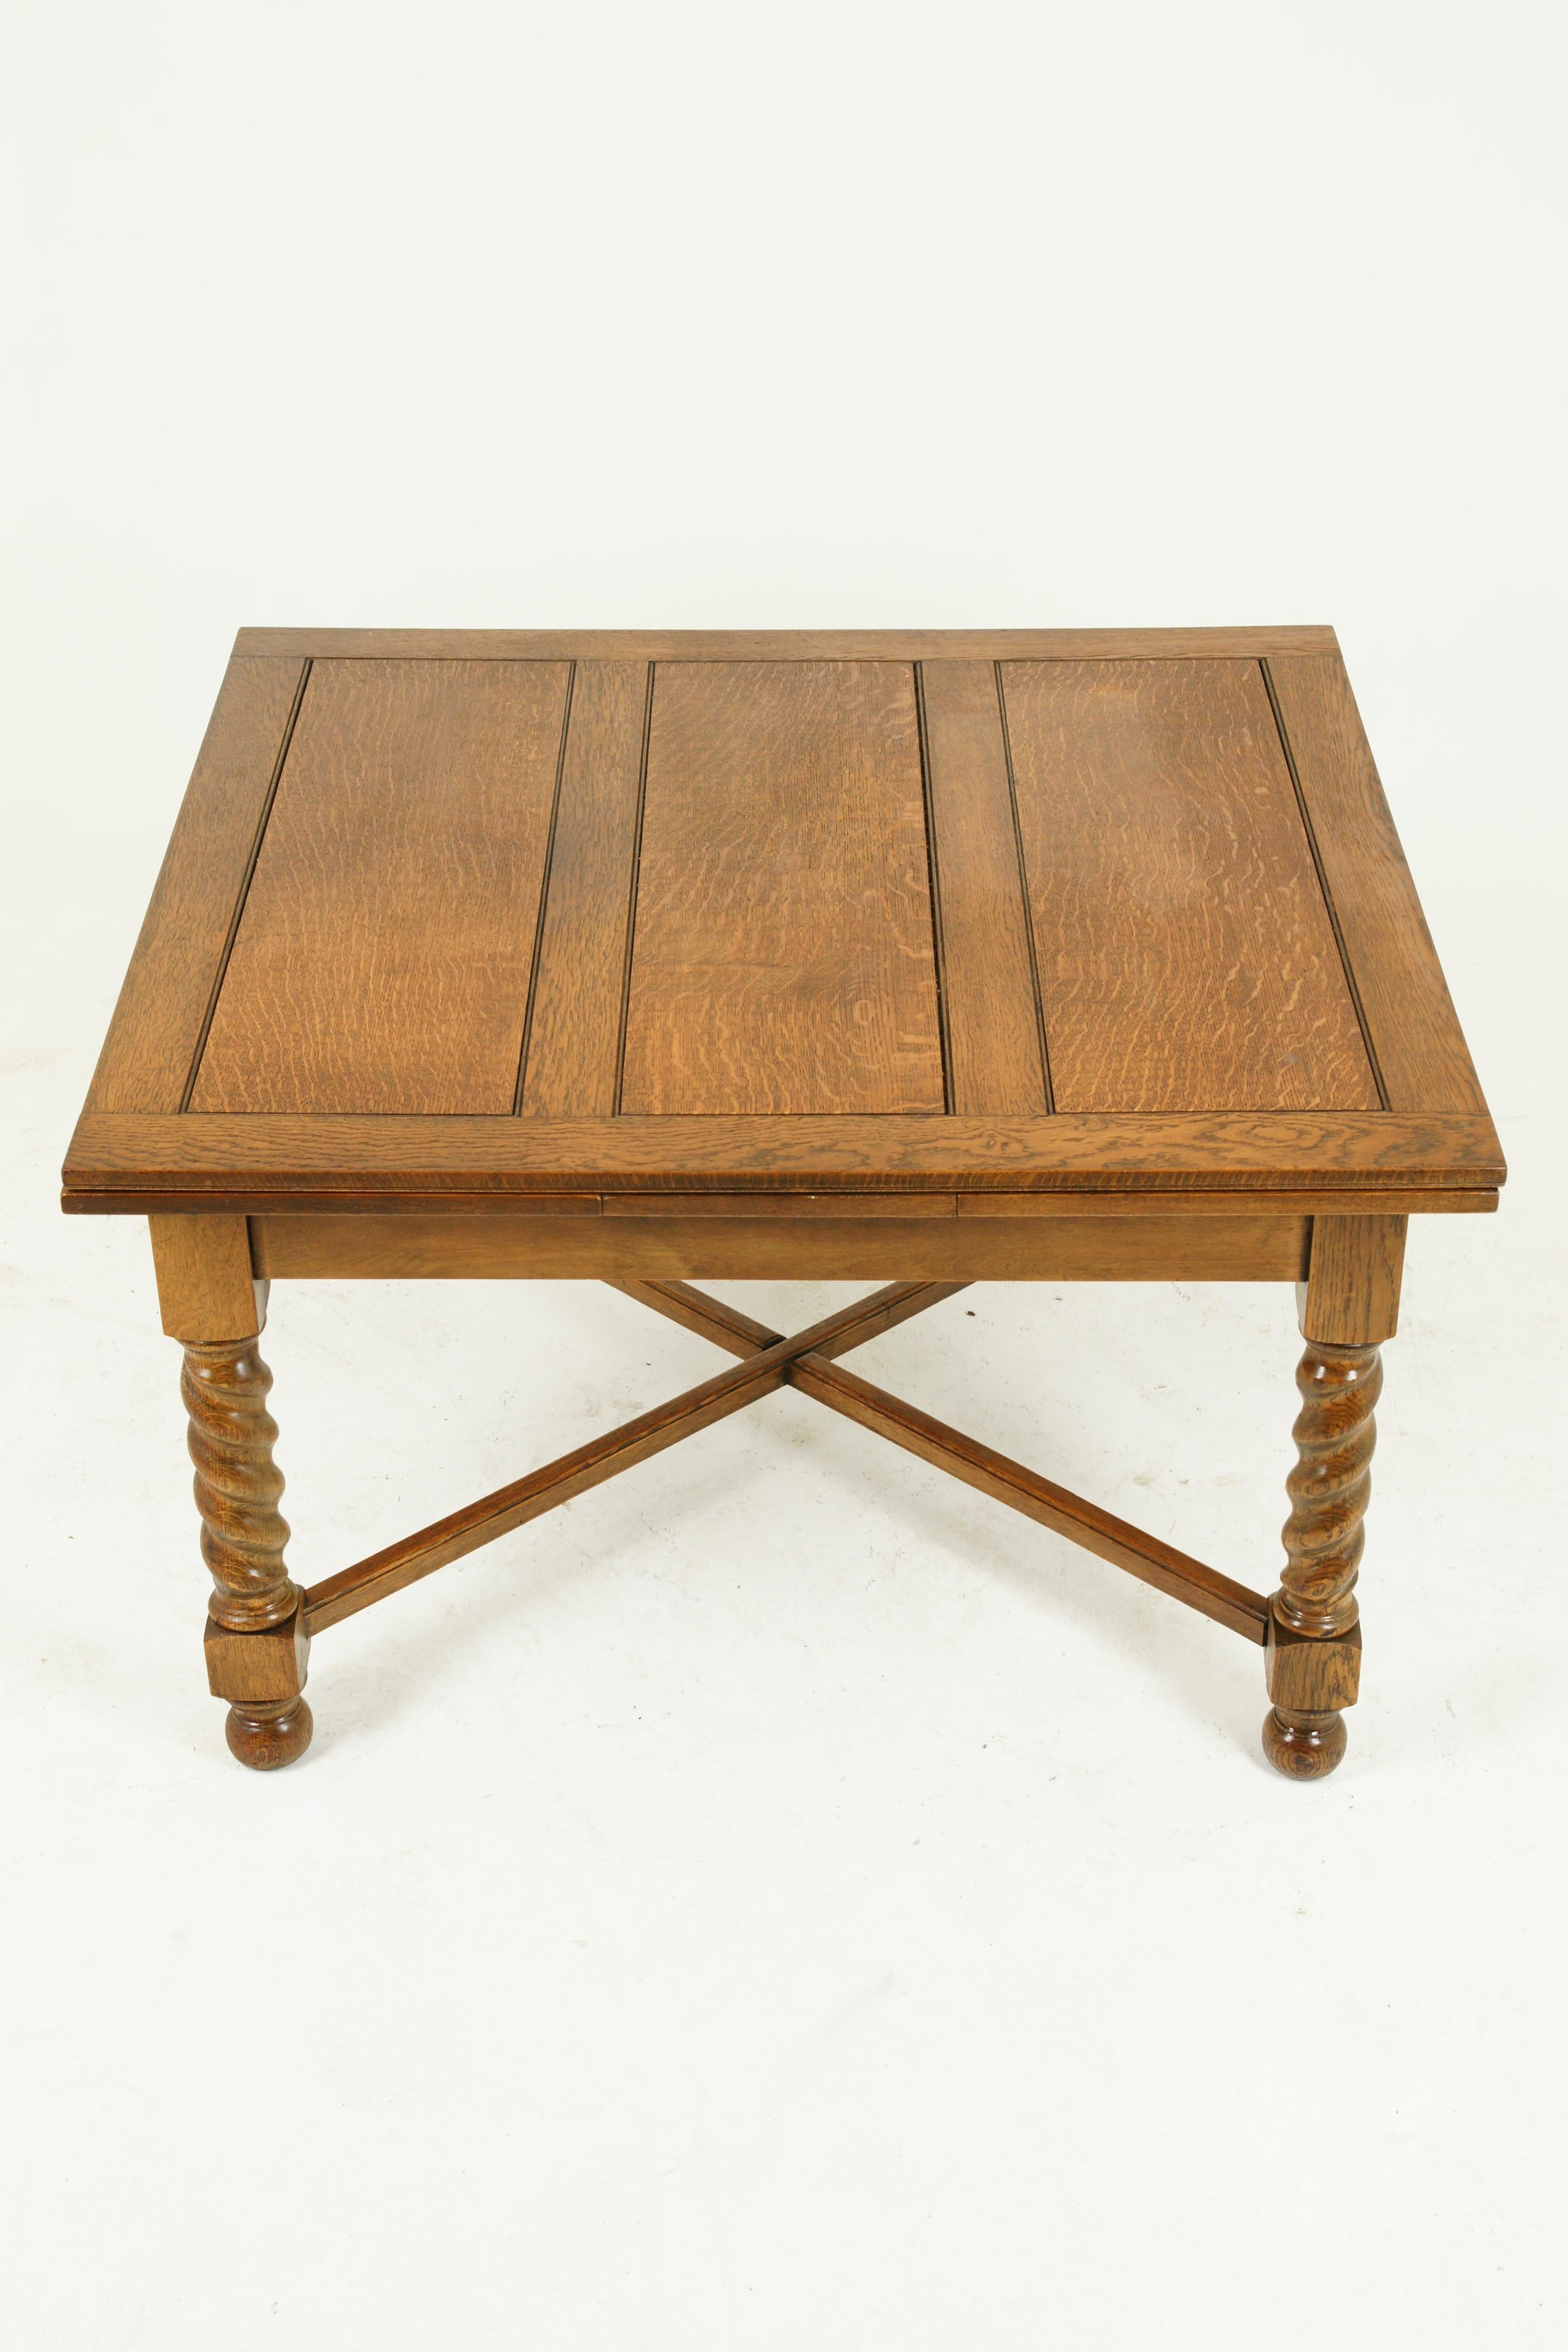 Antique refectory table, antique dining table, draw leaf table, barley twist, Scotland, 1920

Scotland 1920
Solid oak construction
Golden oak finish
Paneled top with pair of paneled leaves underneath
Leaves can be pulled out to extend table to